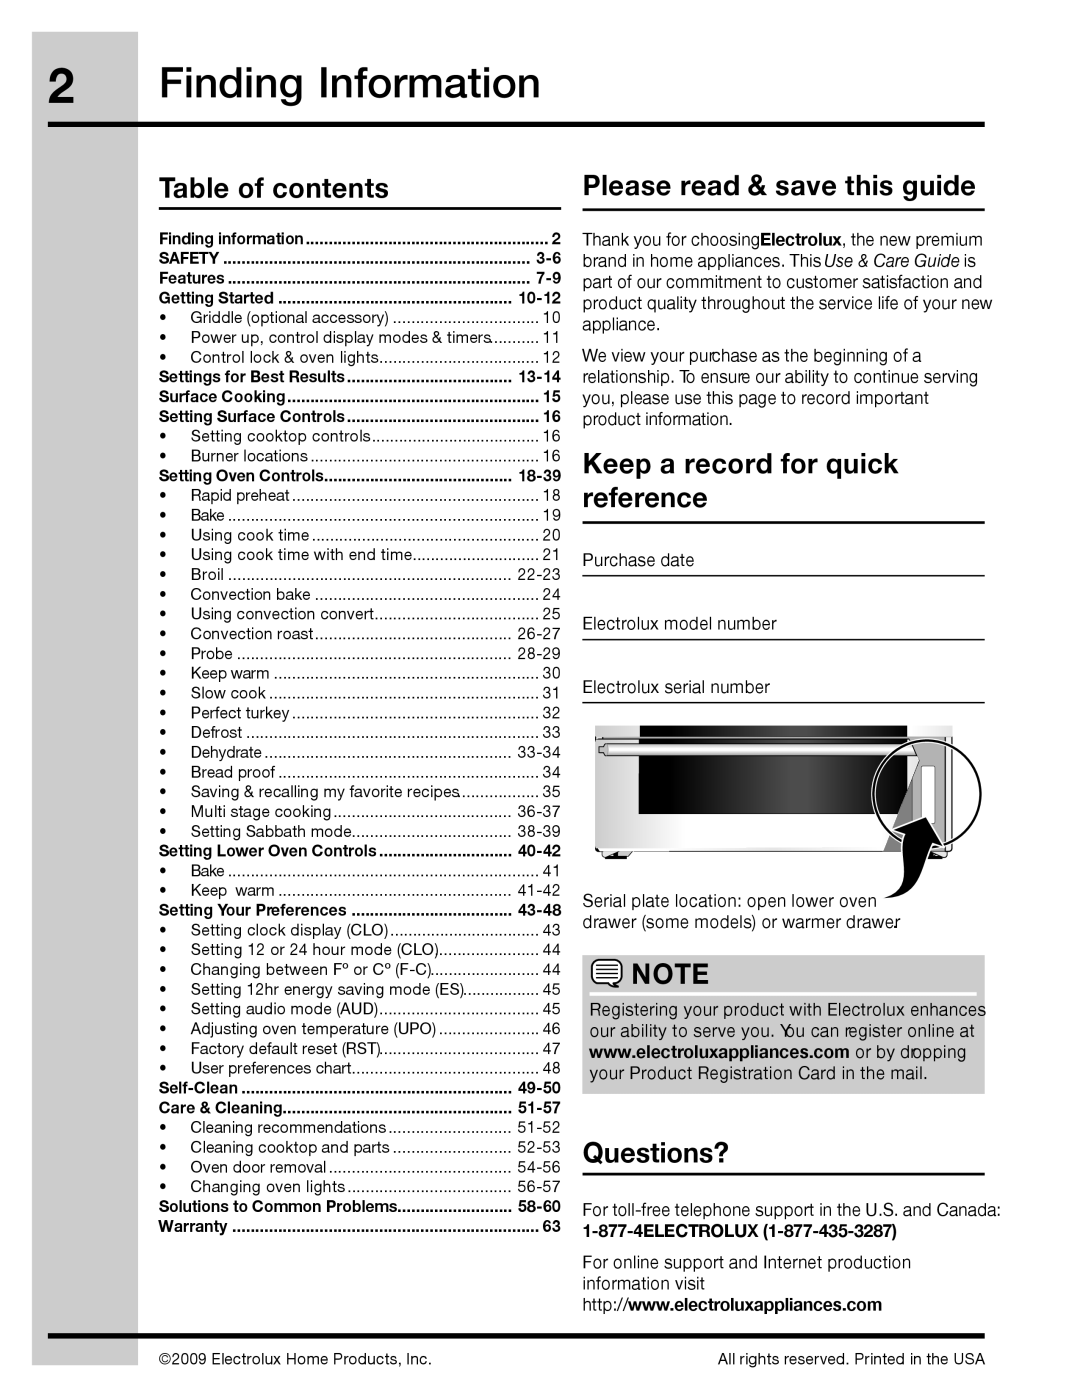 Electrolux 316471110 Finding Information, Table of contents, Please read & save this guide, Questions?, 1-877-4ELECTROLUX 